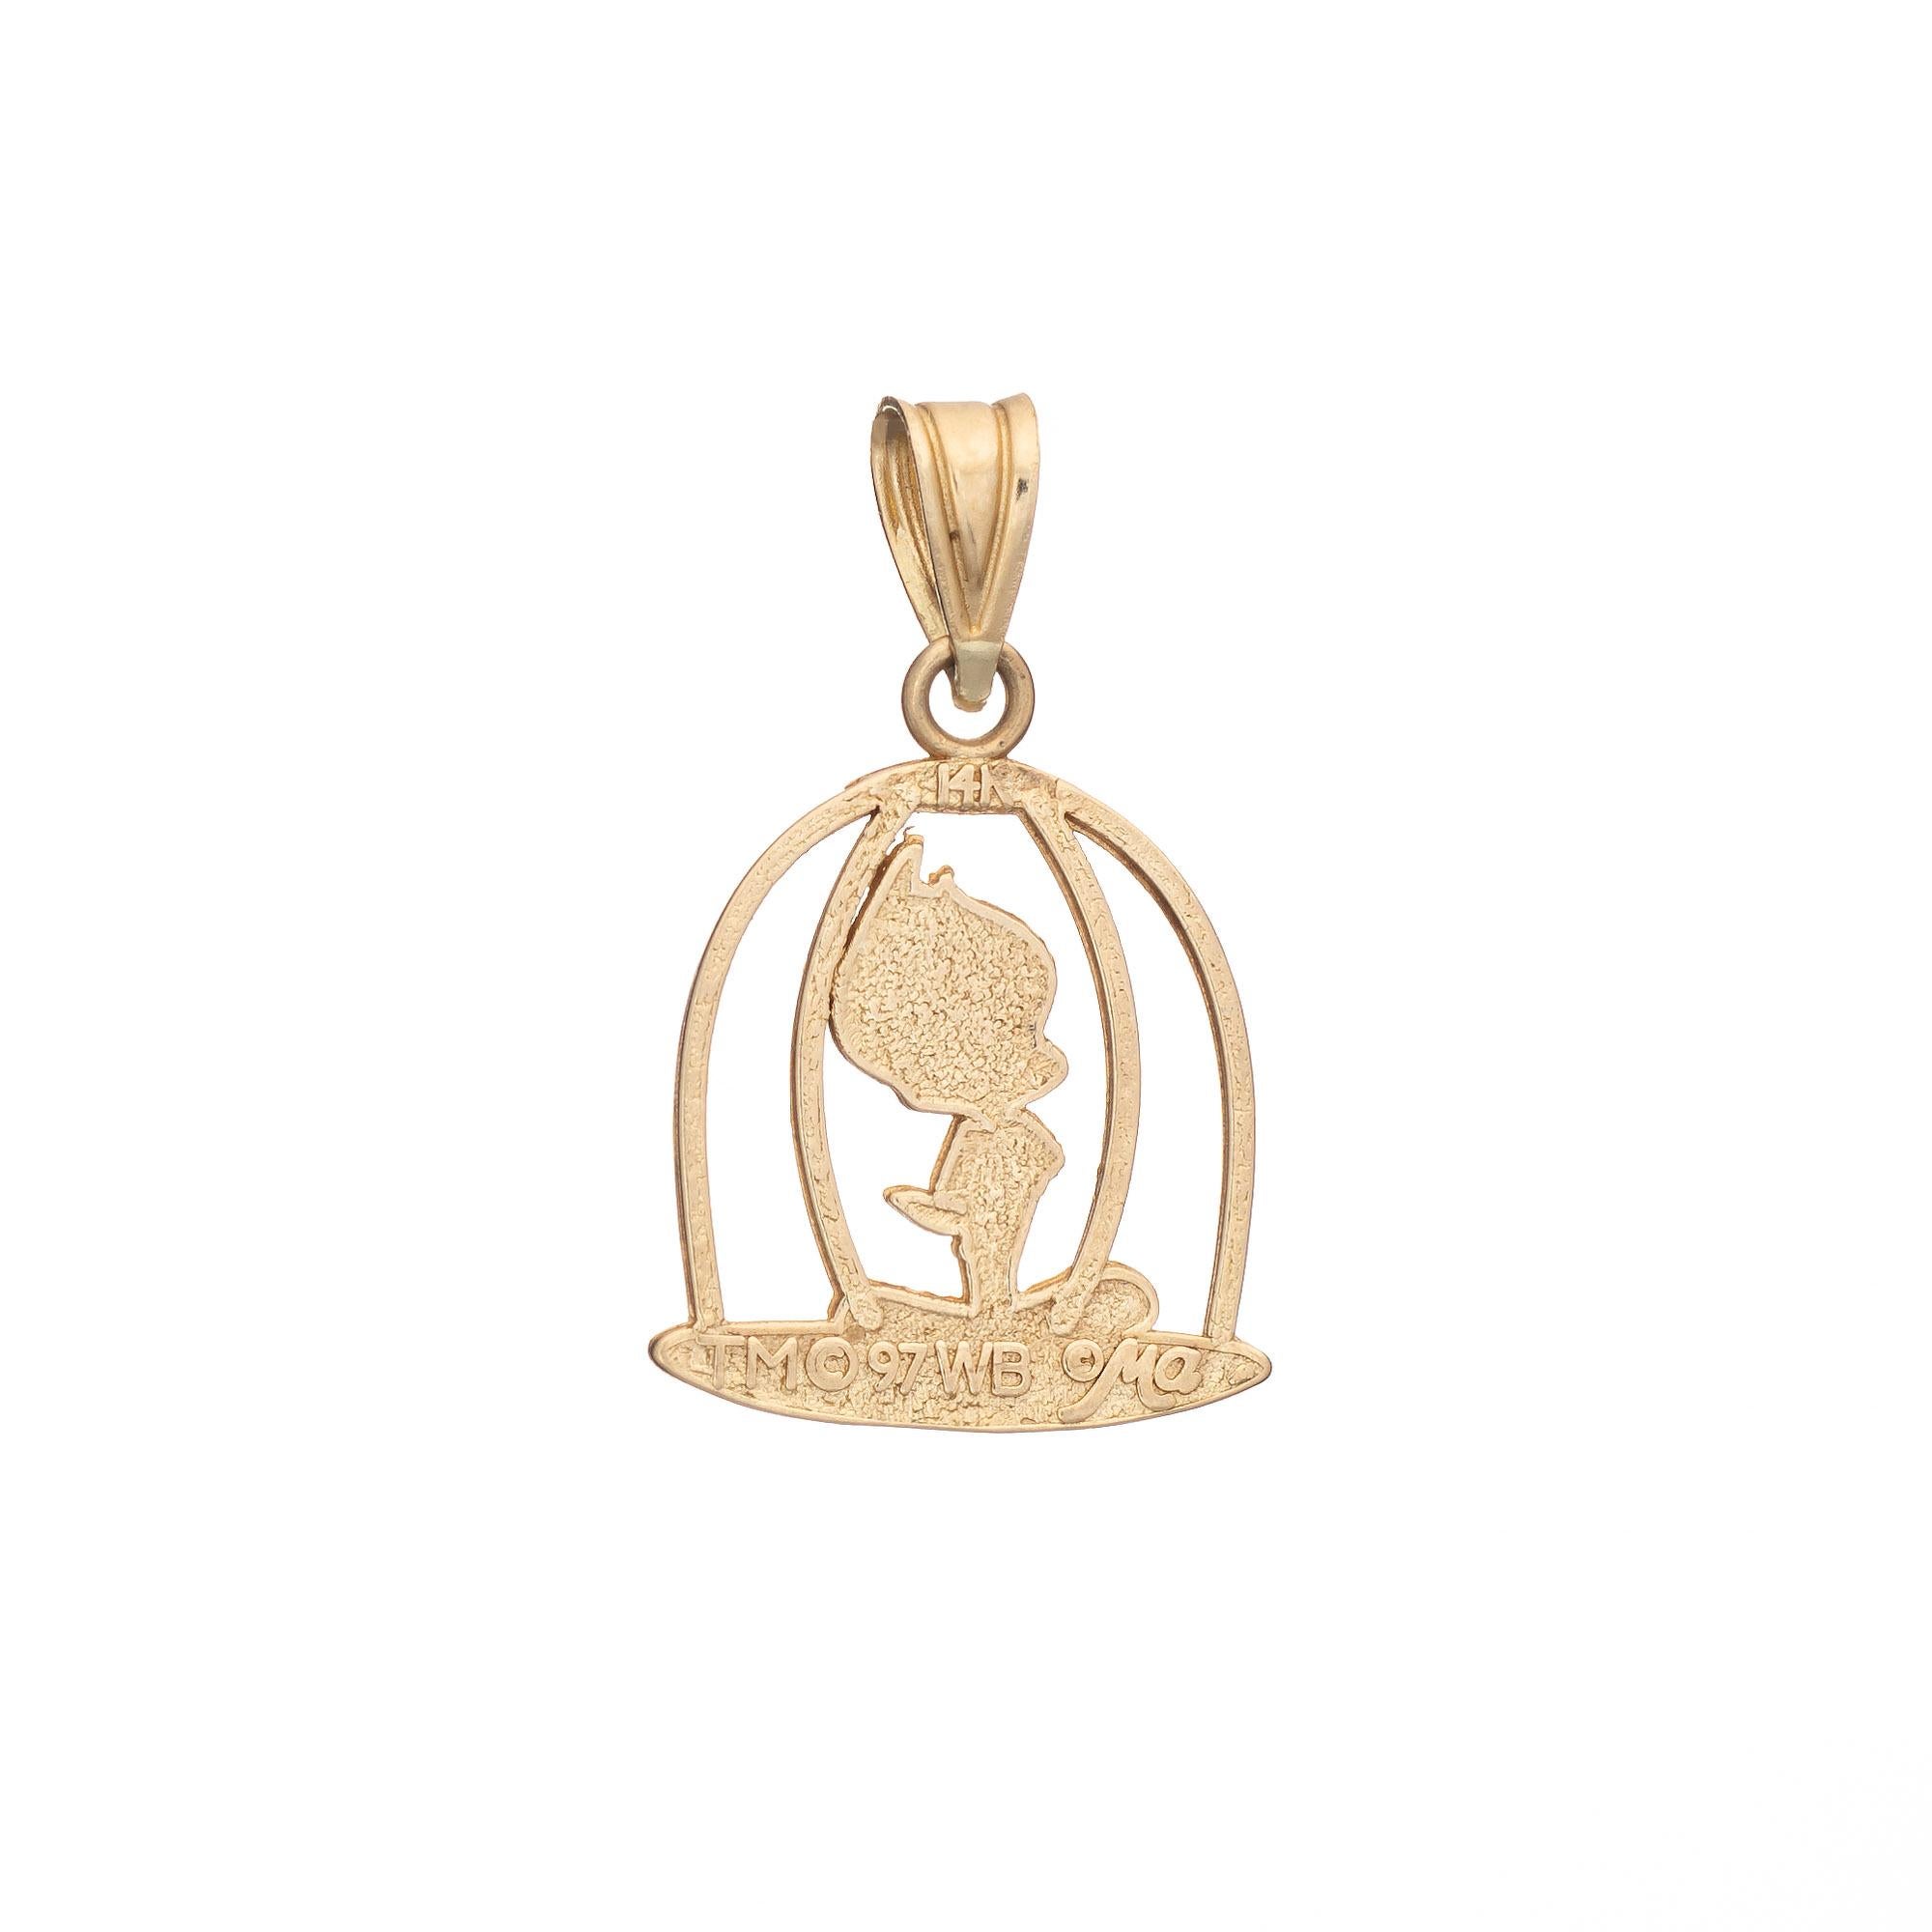 Finely detailed vintage Tweety Bird in Cage charm crafted in 18k yellow gold (circa 1997).  

The sweet charm is nicely detailed, featuring Tweety Bird perched in a cage. Small in scale the piece is ideal worn as a pendant or on a charm